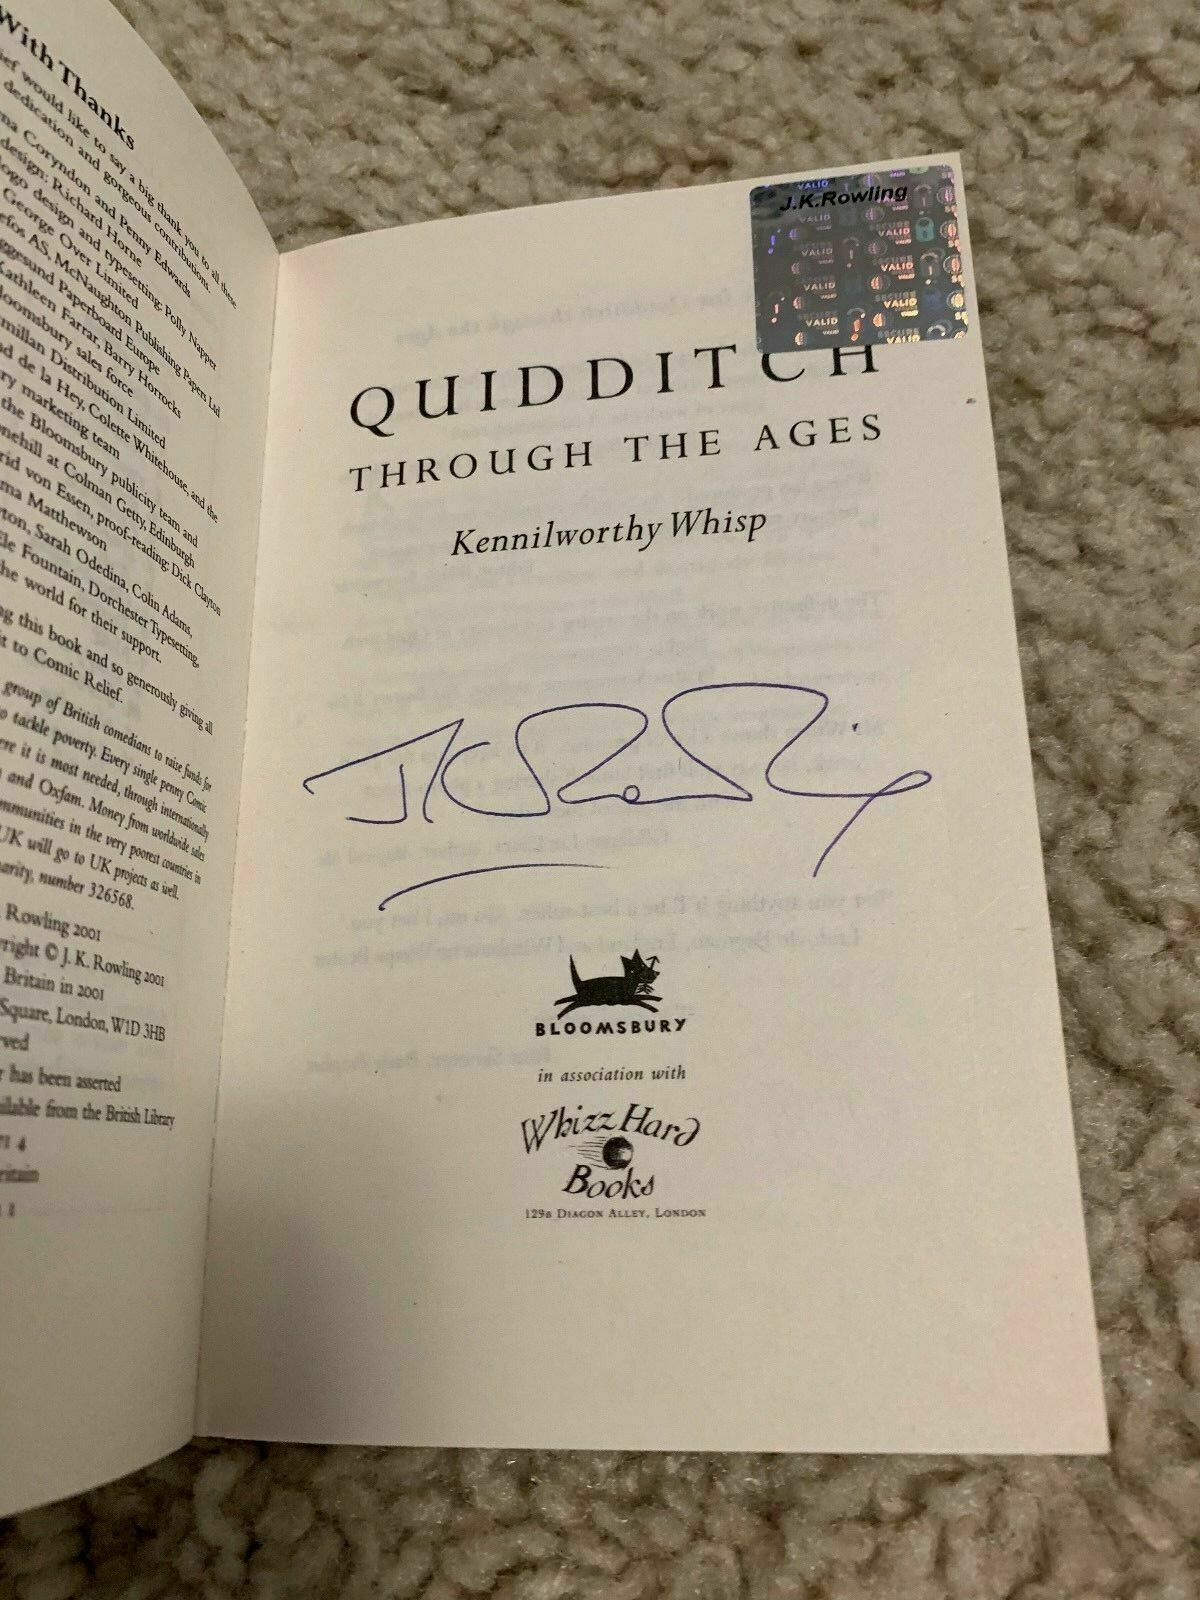 JK Rowling Forgery with an authentic Hologram inside of a Quidditch Through the Ages